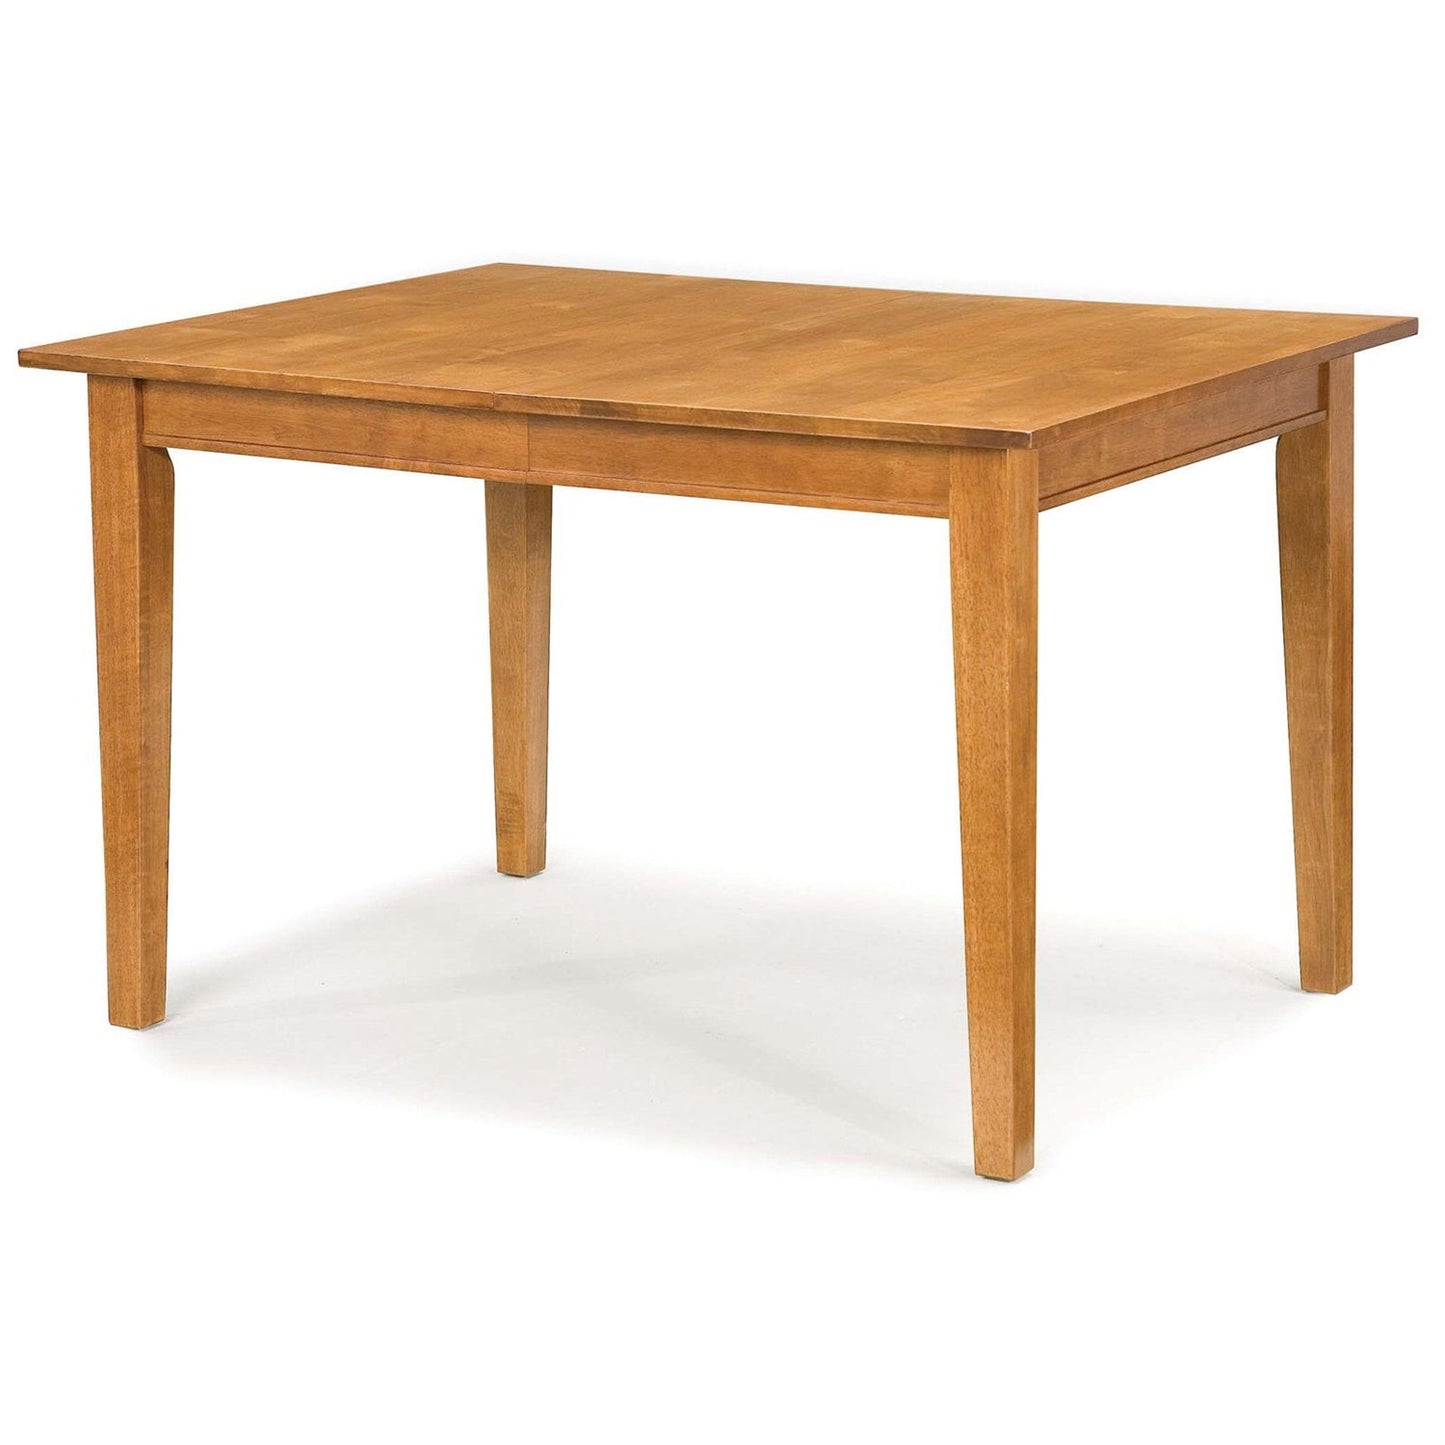 Dining > Dining Tables - Space Saving Extendable Dining Table In Cottage Oak Finish